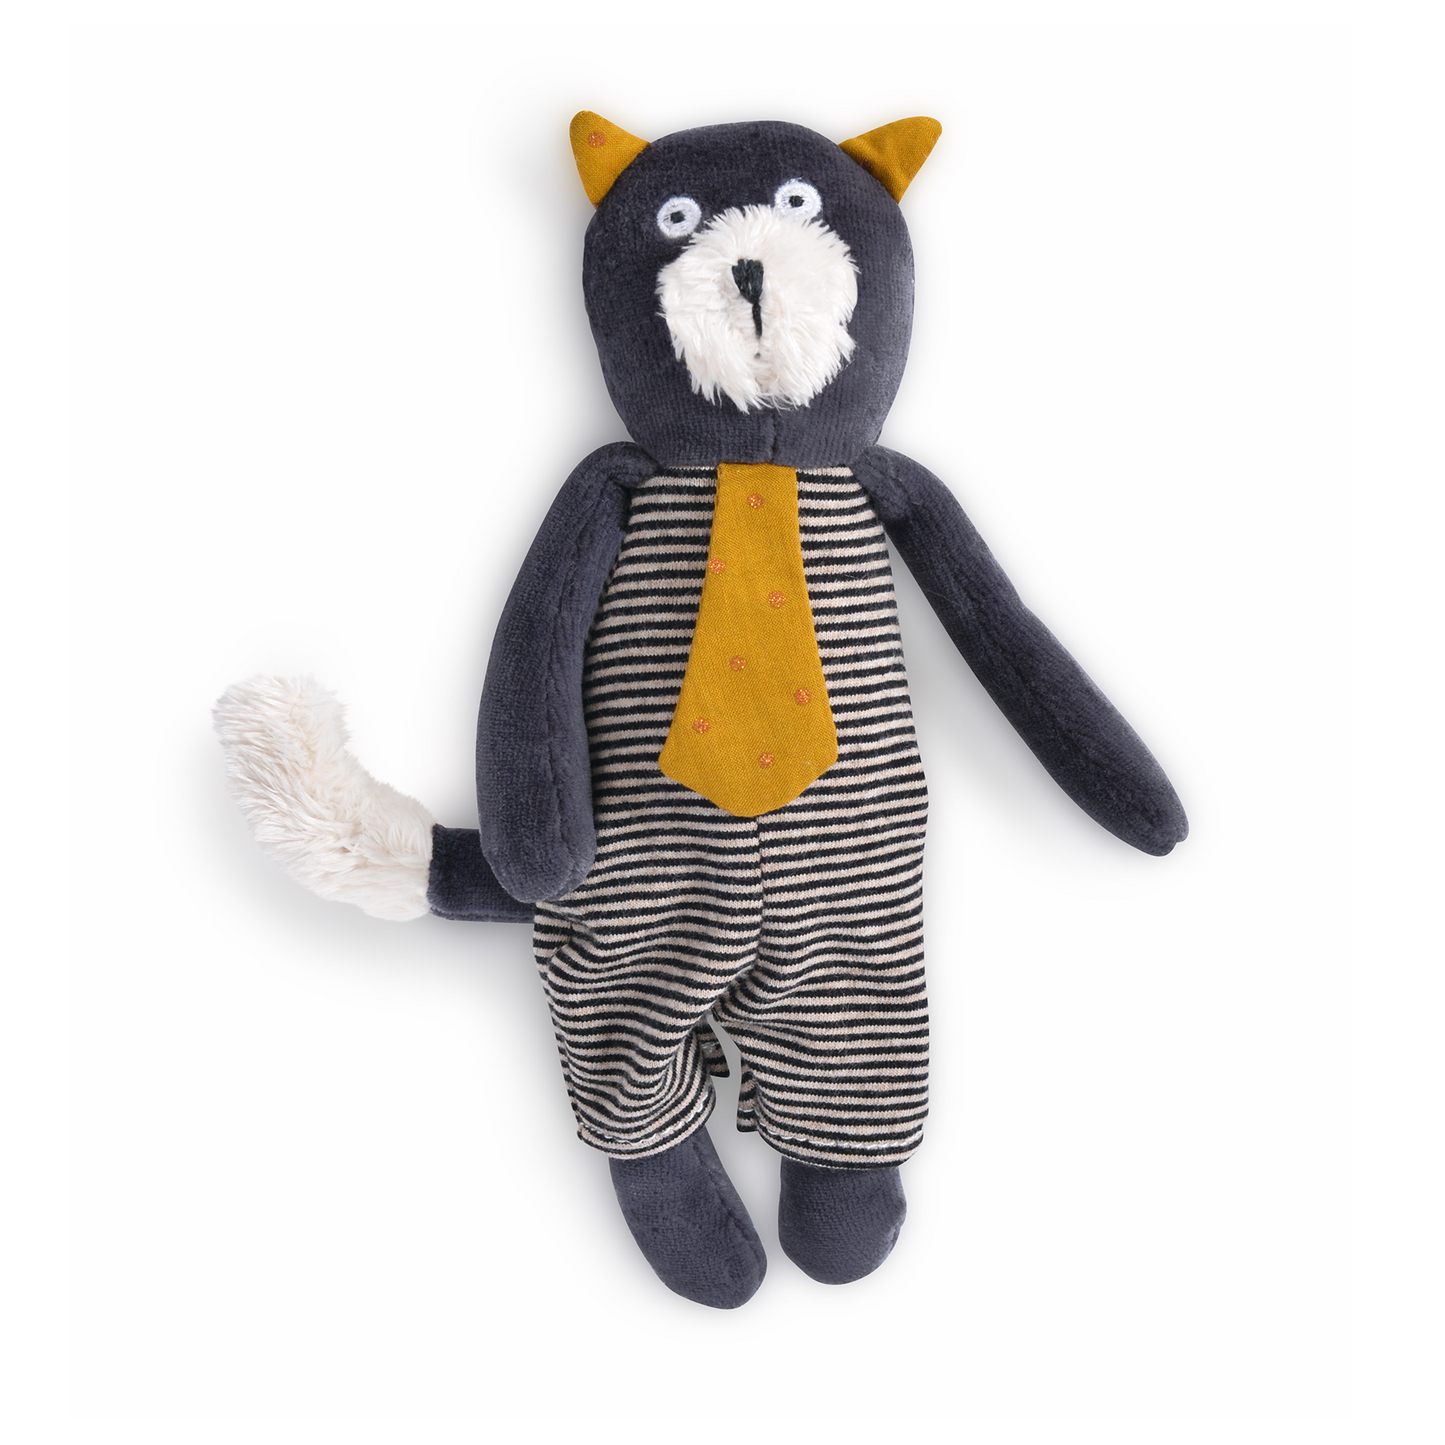 Meet Petitie Alphonse! Part of the Moustaches family, perfect for a snuggle. These small cute cats are safe for newborns.